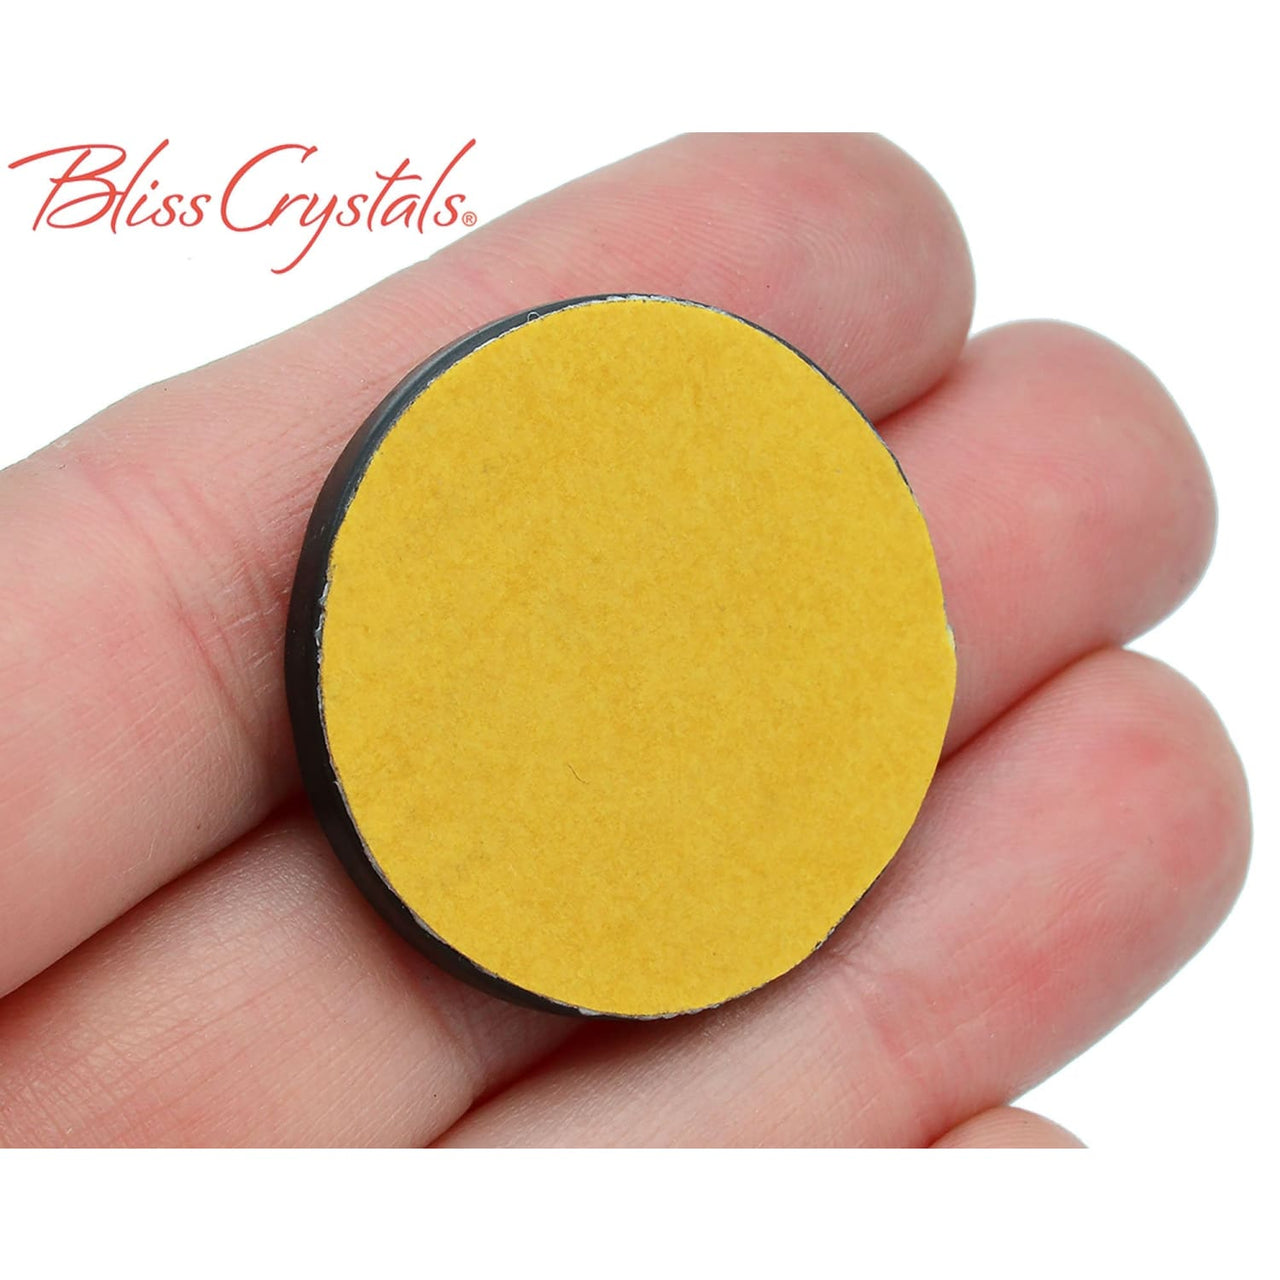 Shungite OM Adhesive Disc for phone for protection from EMF 